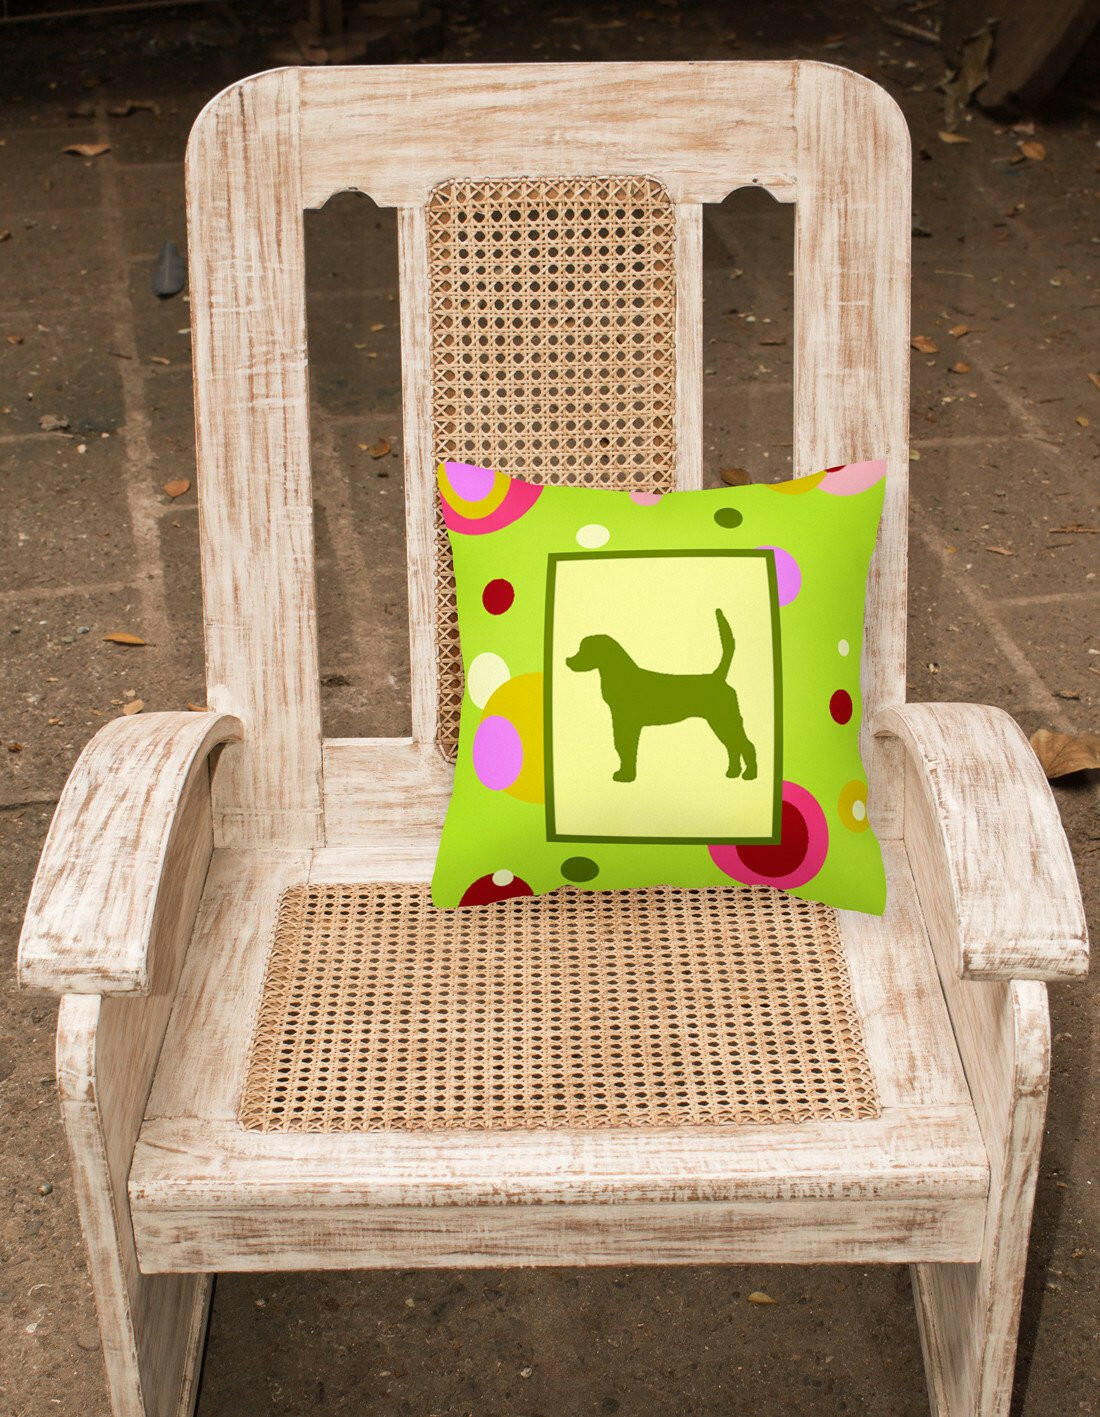 Lime Green Dots English Foxhound Fabric Decorative Pillow CK1027PW1414 by Caroline's Treasures